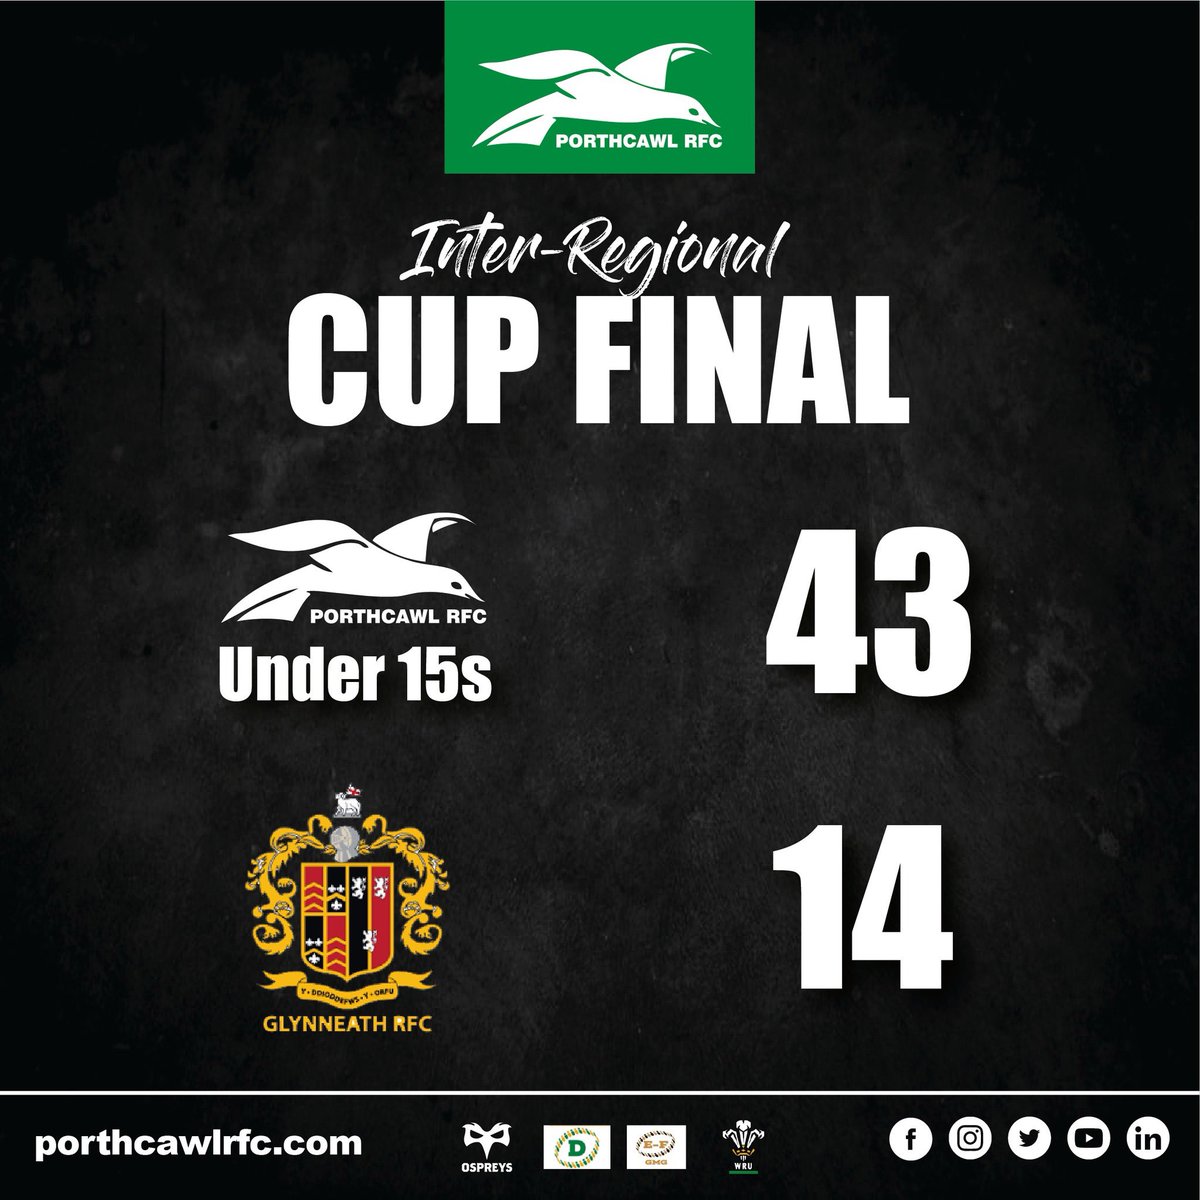 Ospreys Champions 🏆

Congratulations to our Under 15s who are Ospreys Champions following their 43 - 14 win against a quality Glynneath team in the the Inter-Regional Cup final. Some superb tries scored!

Well done lads 👏

...
#ProudClub
💚🖤